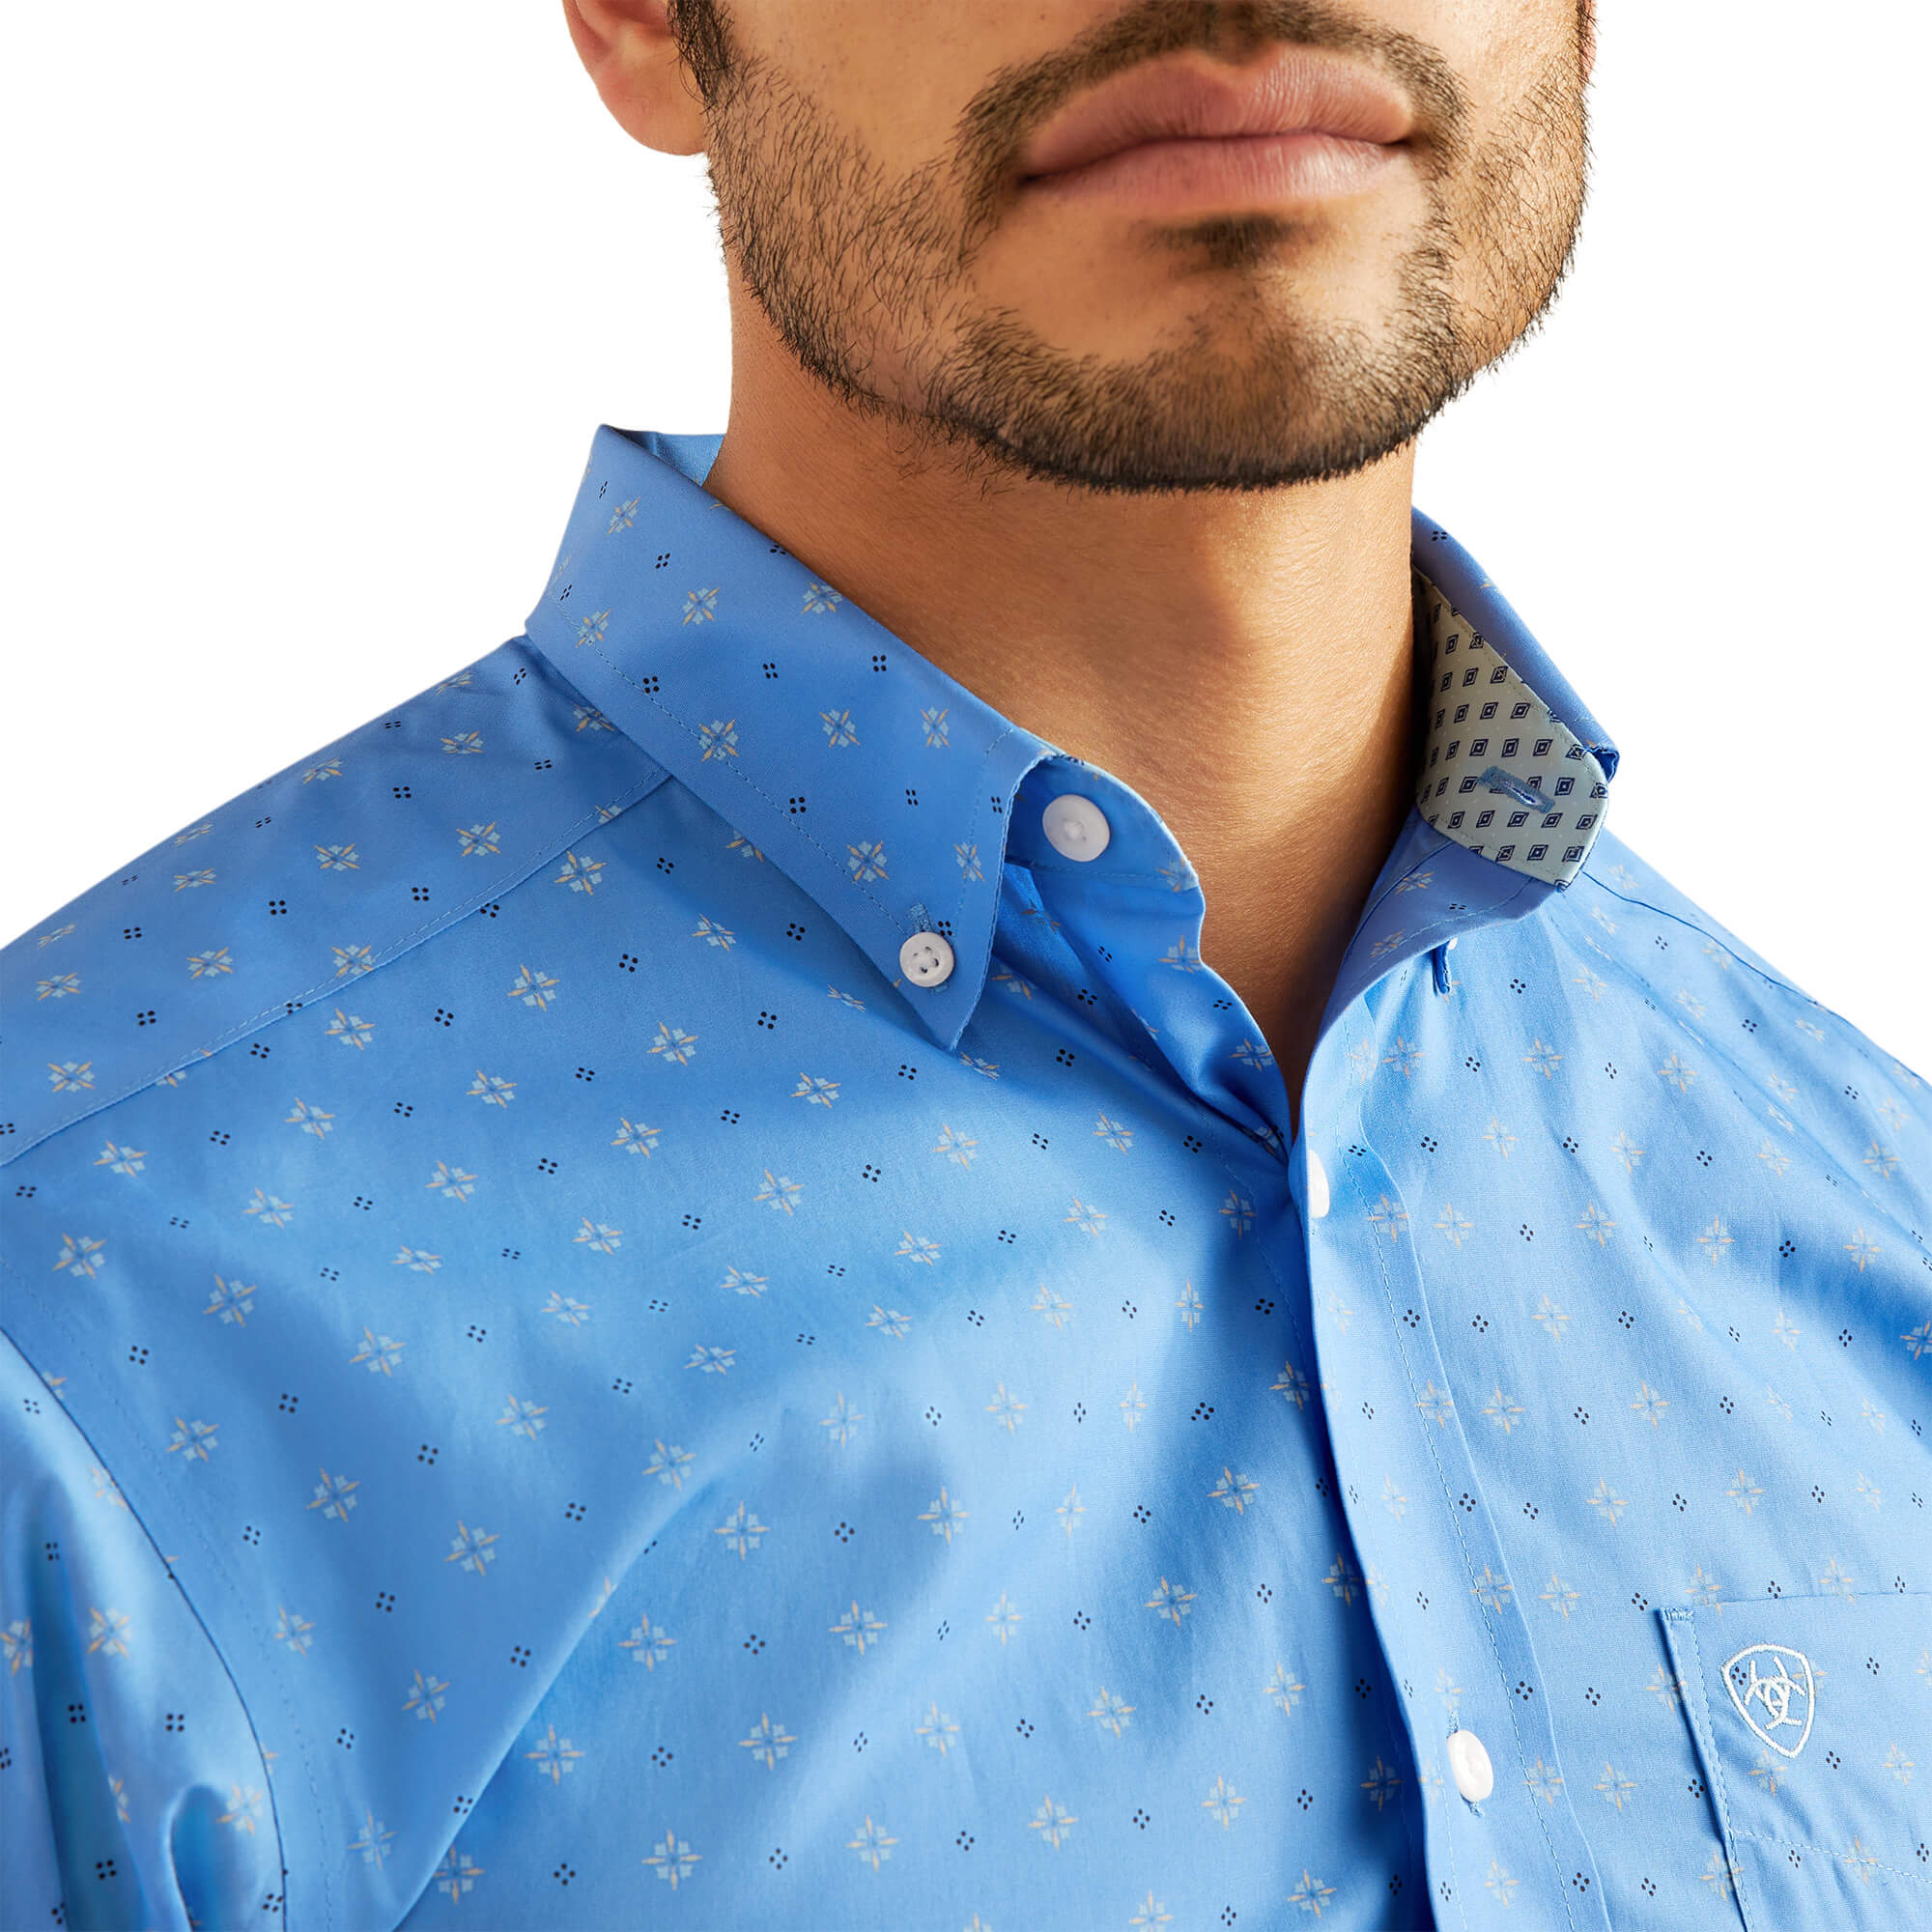 Ariat Russel Wrinkle Free Fitted Shirt collar detail